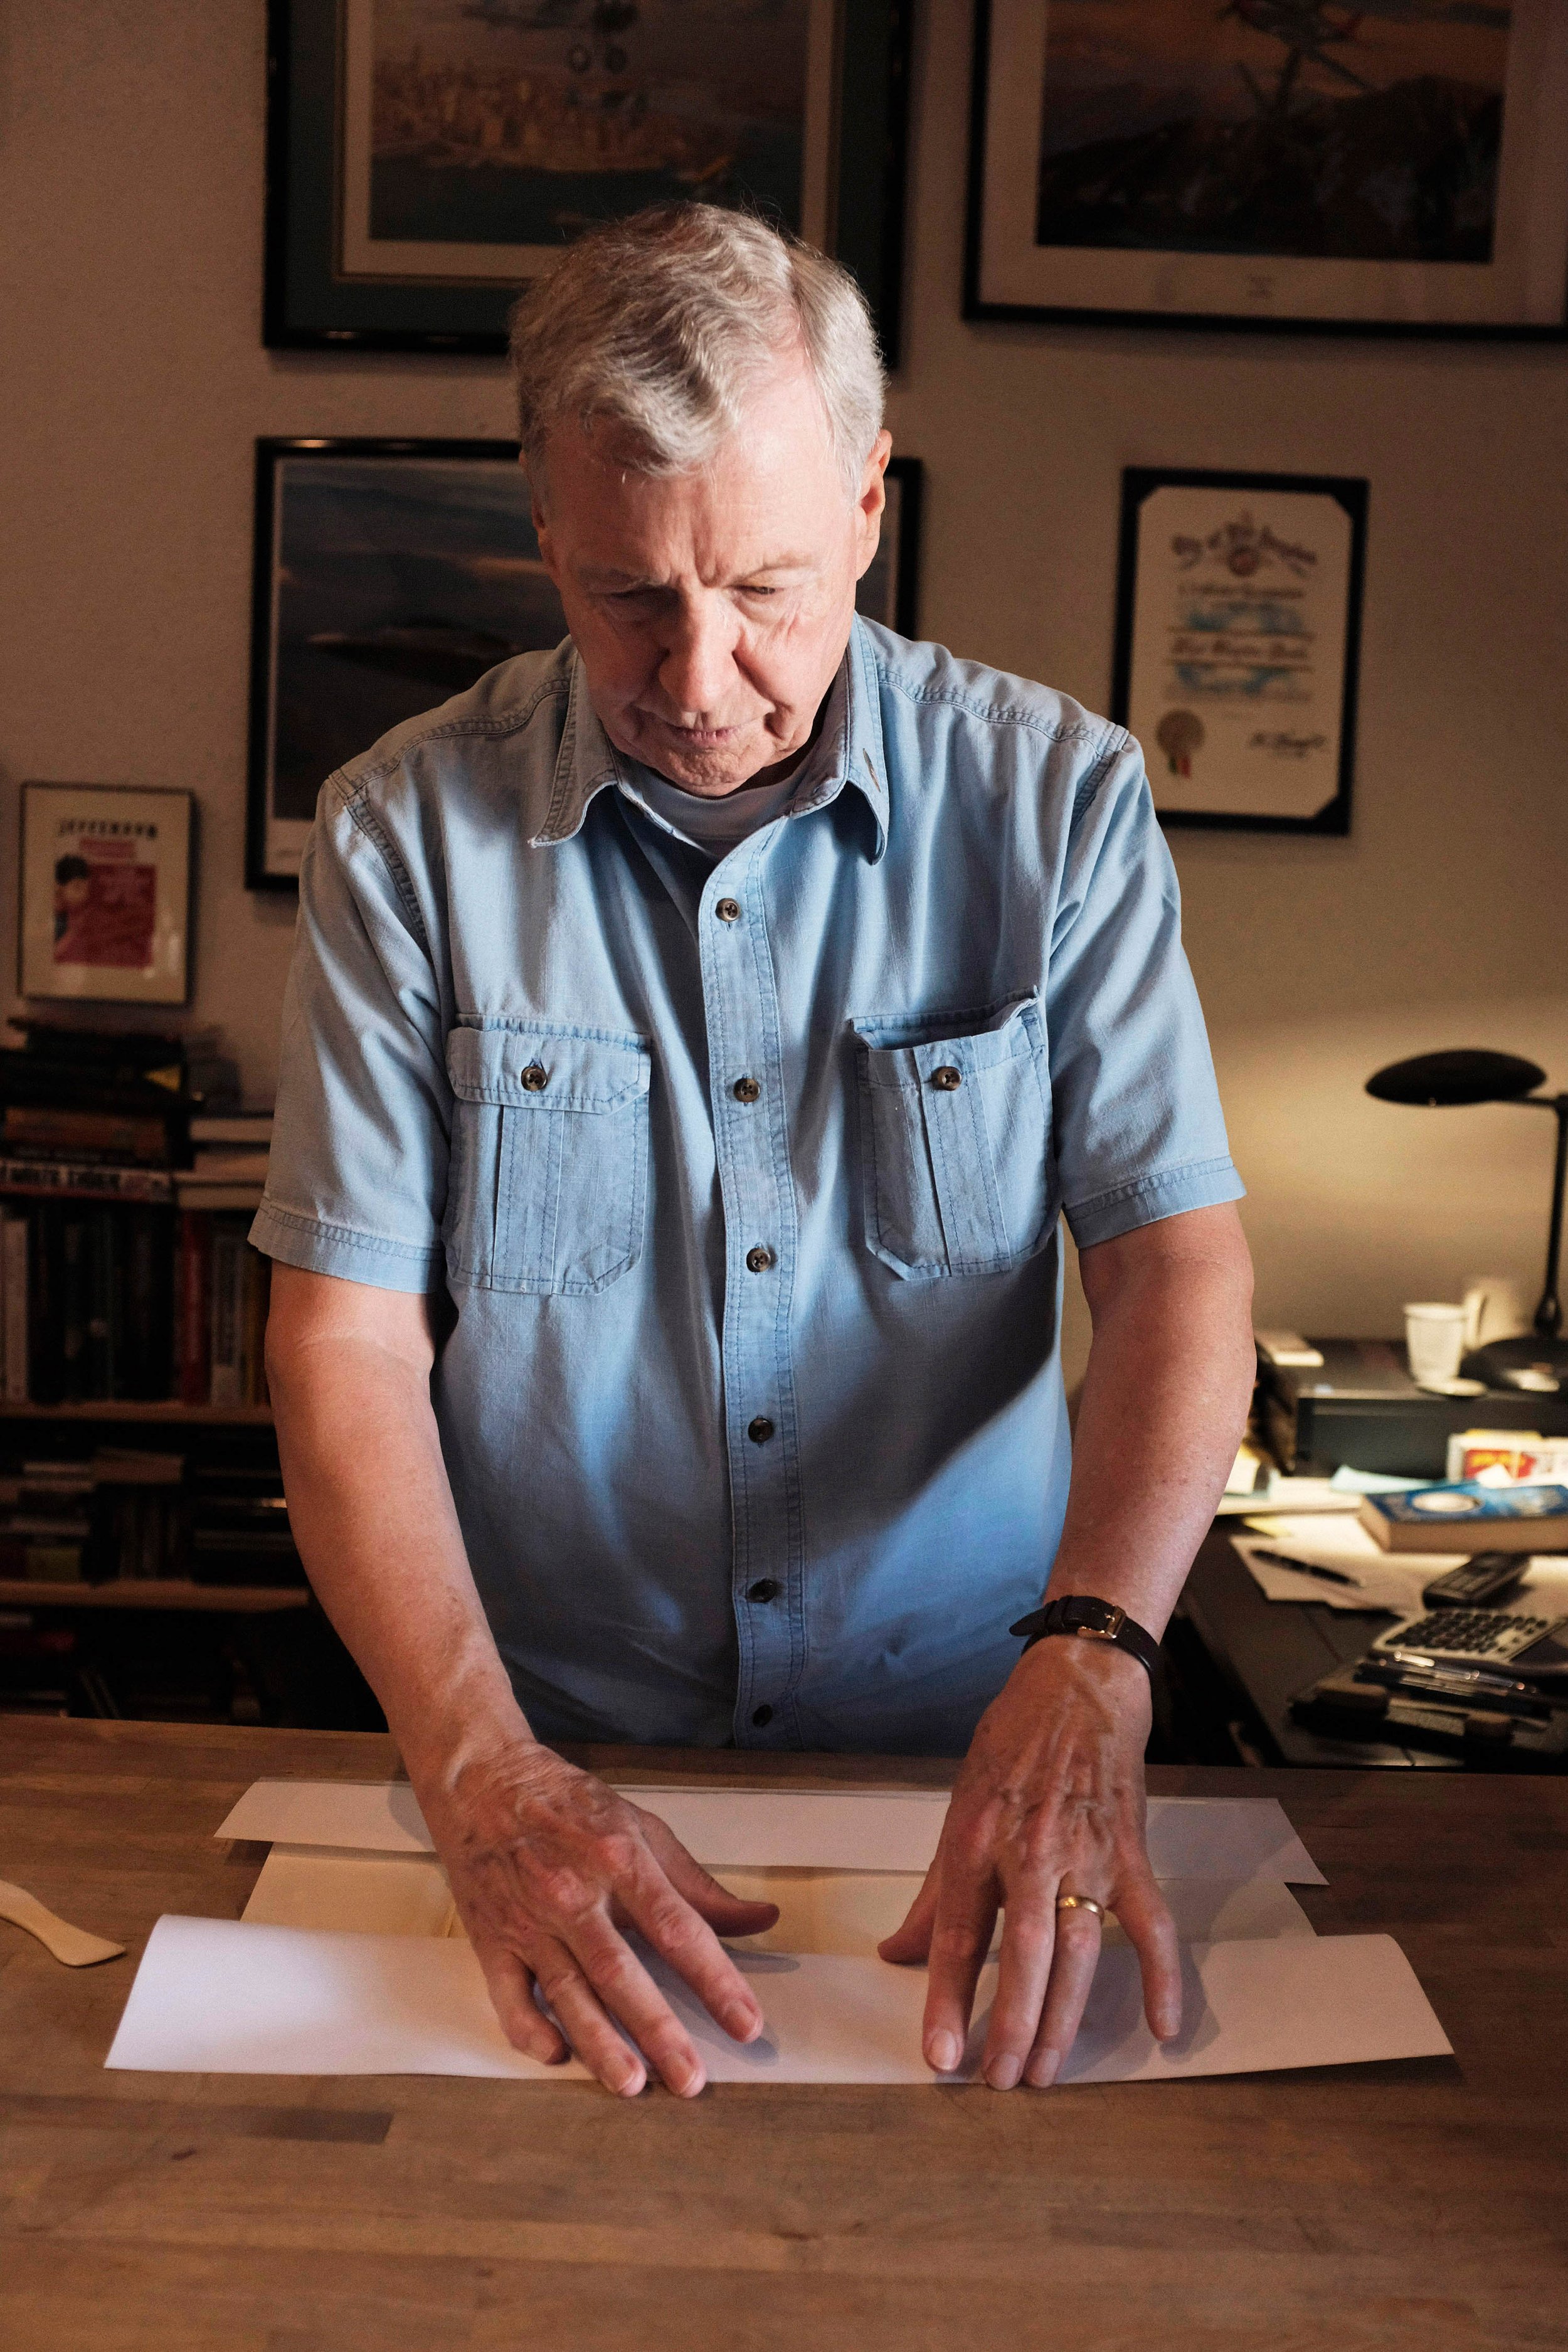  Boyd Davis places a new dust jacket over the tattered cover a book titled The Uncollected Wodehouse. Davis explains his process, sharing that this is “a book that’s in sad shape, and needs to be protected. I love books, and have to preserve them as 